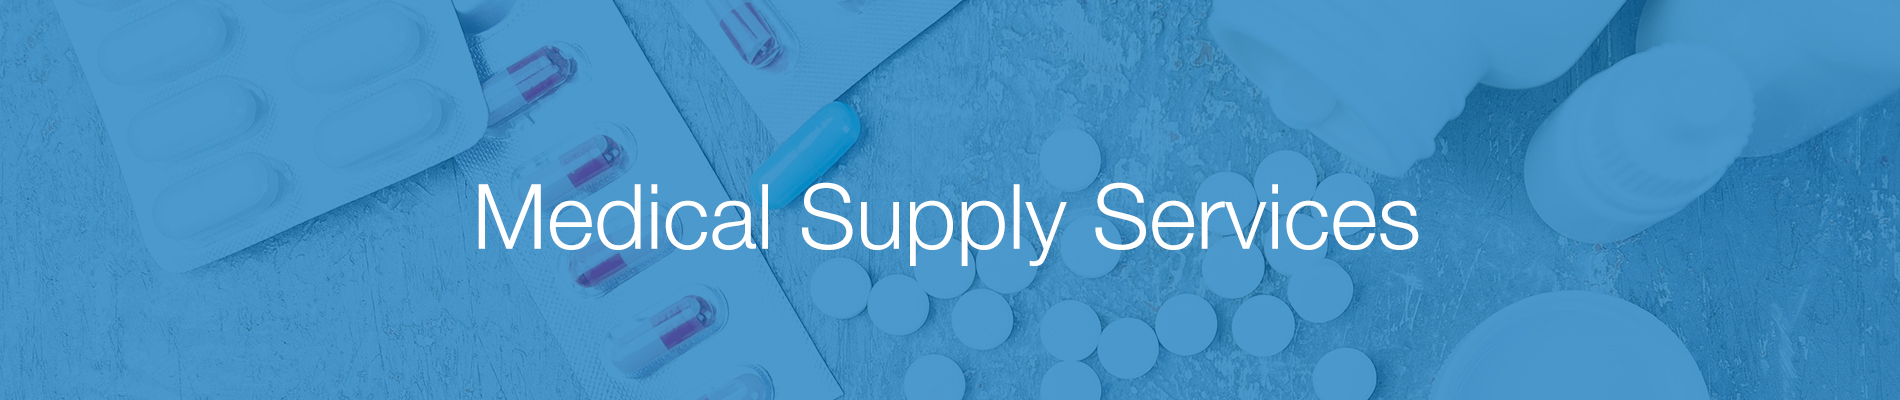 Medical Supply Services